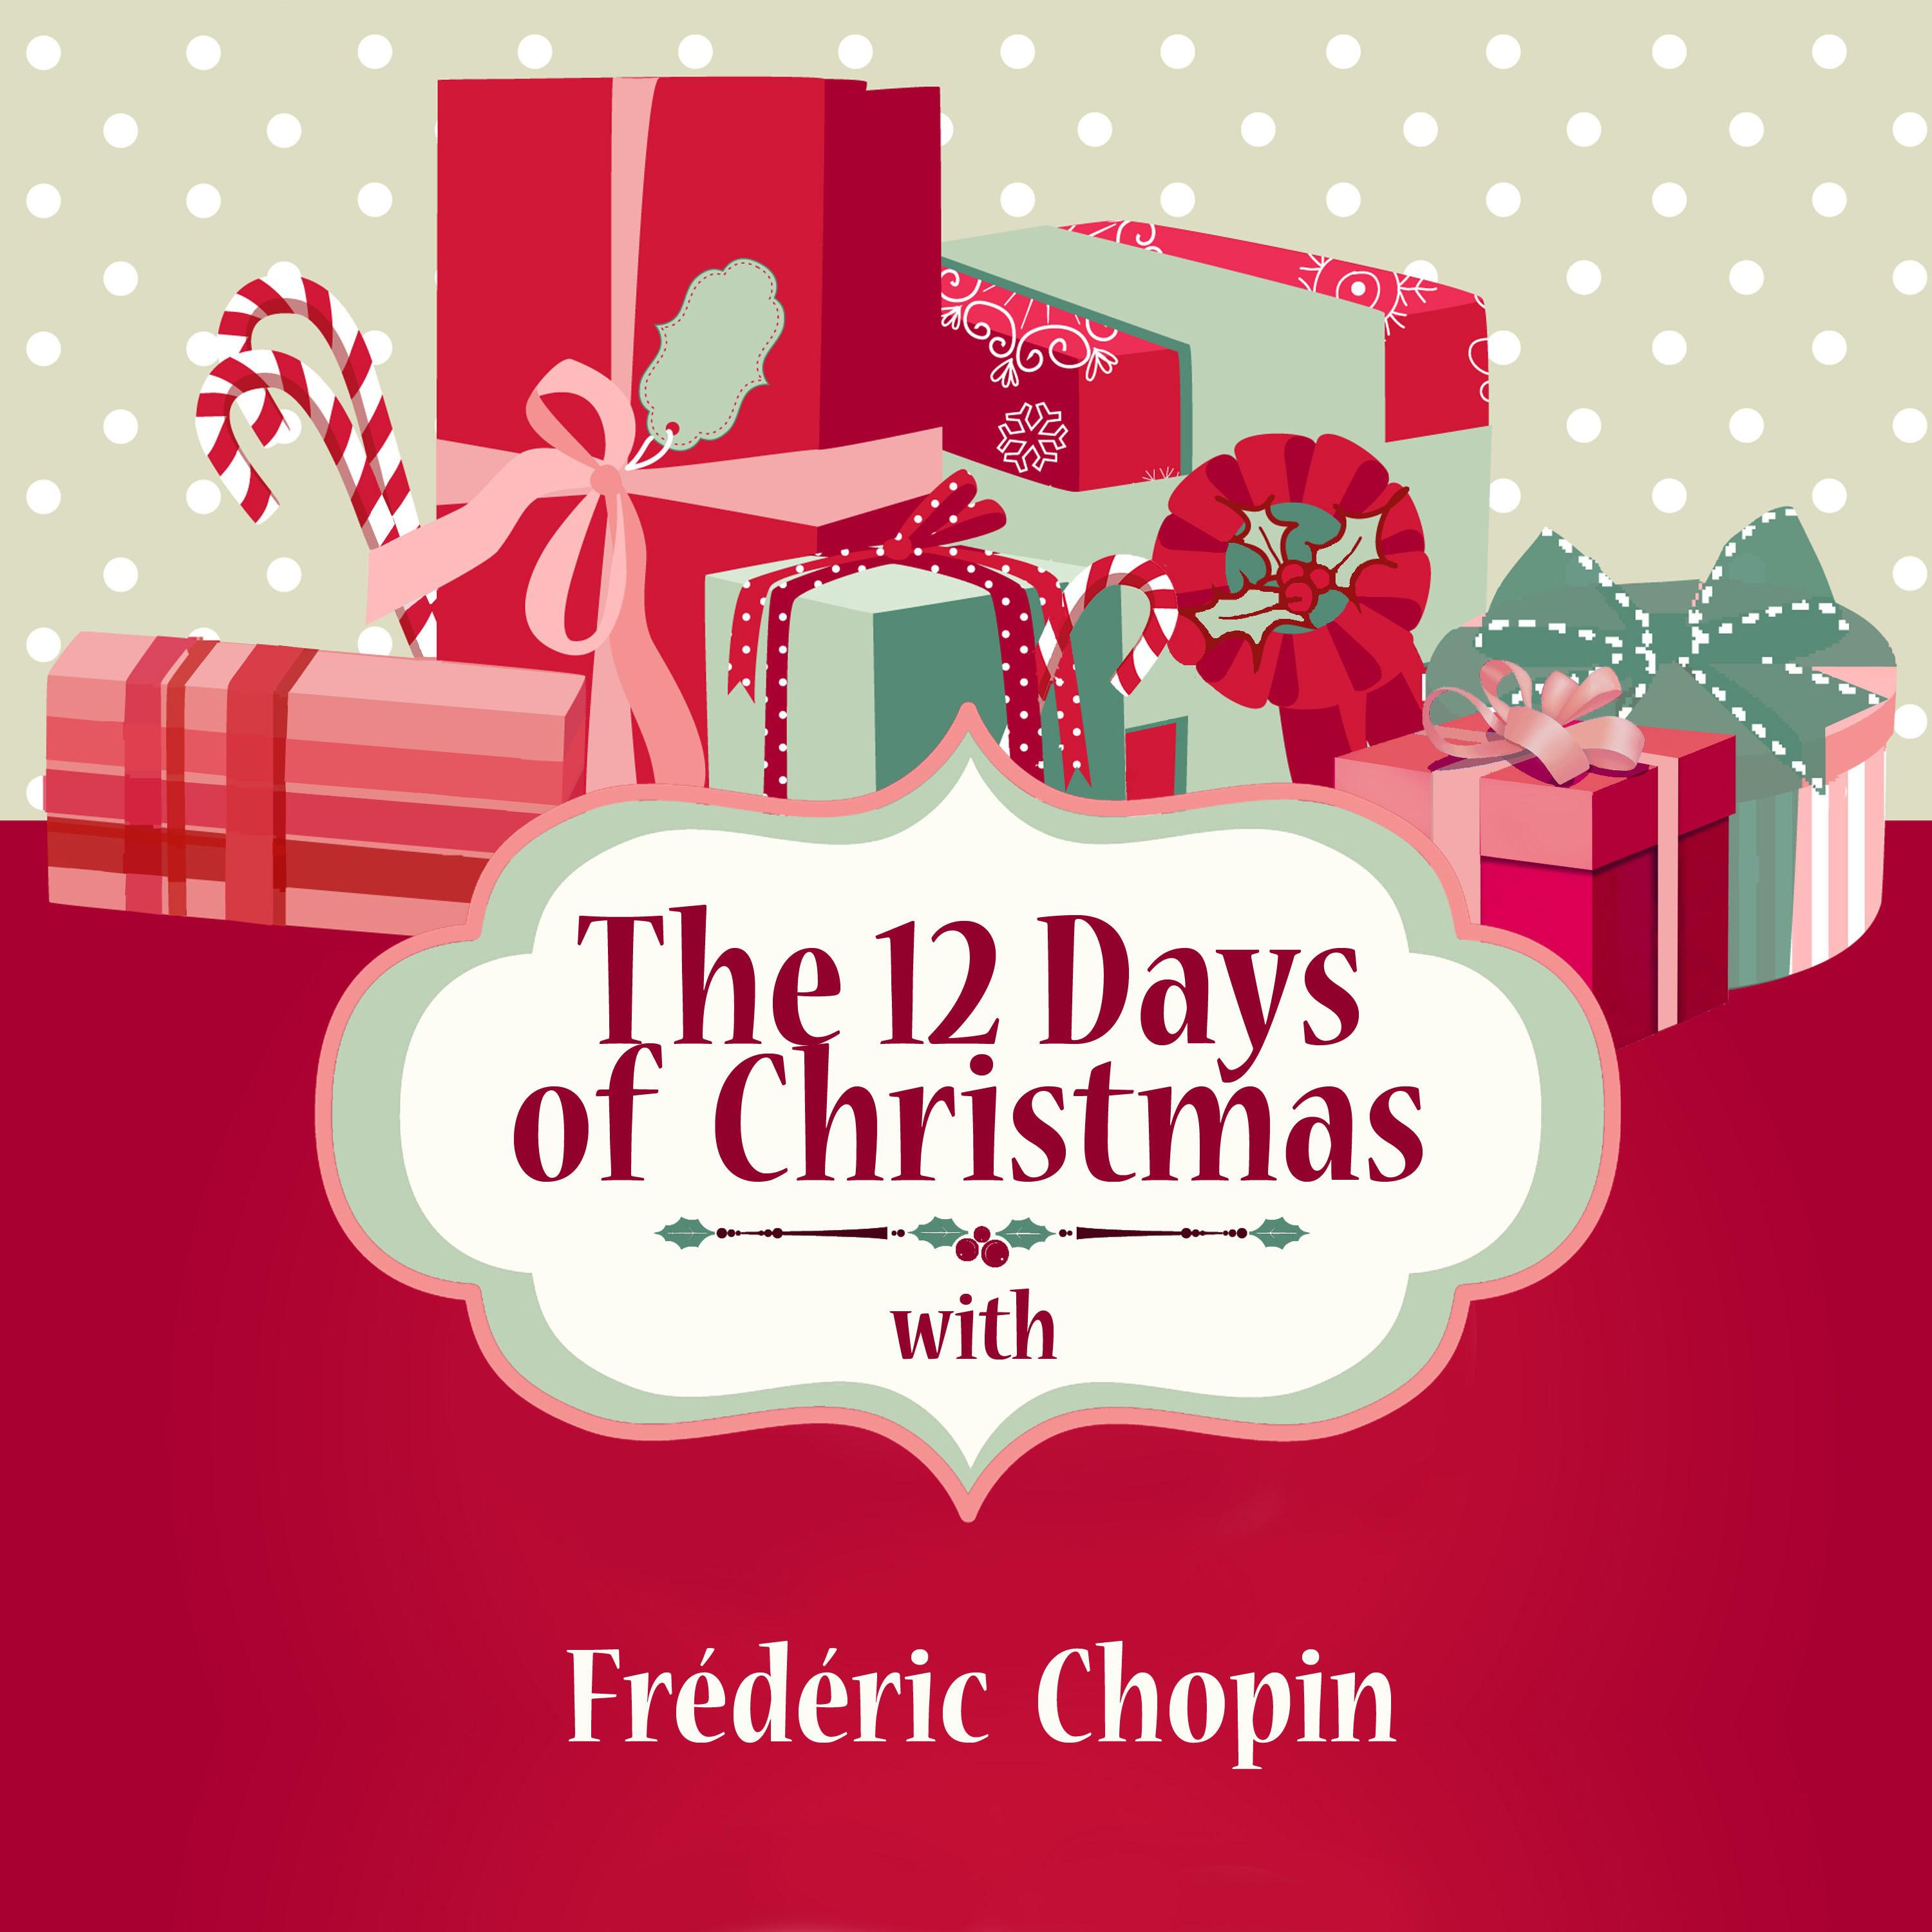 The 12 Days of Christmas with Fre de ric Chopin